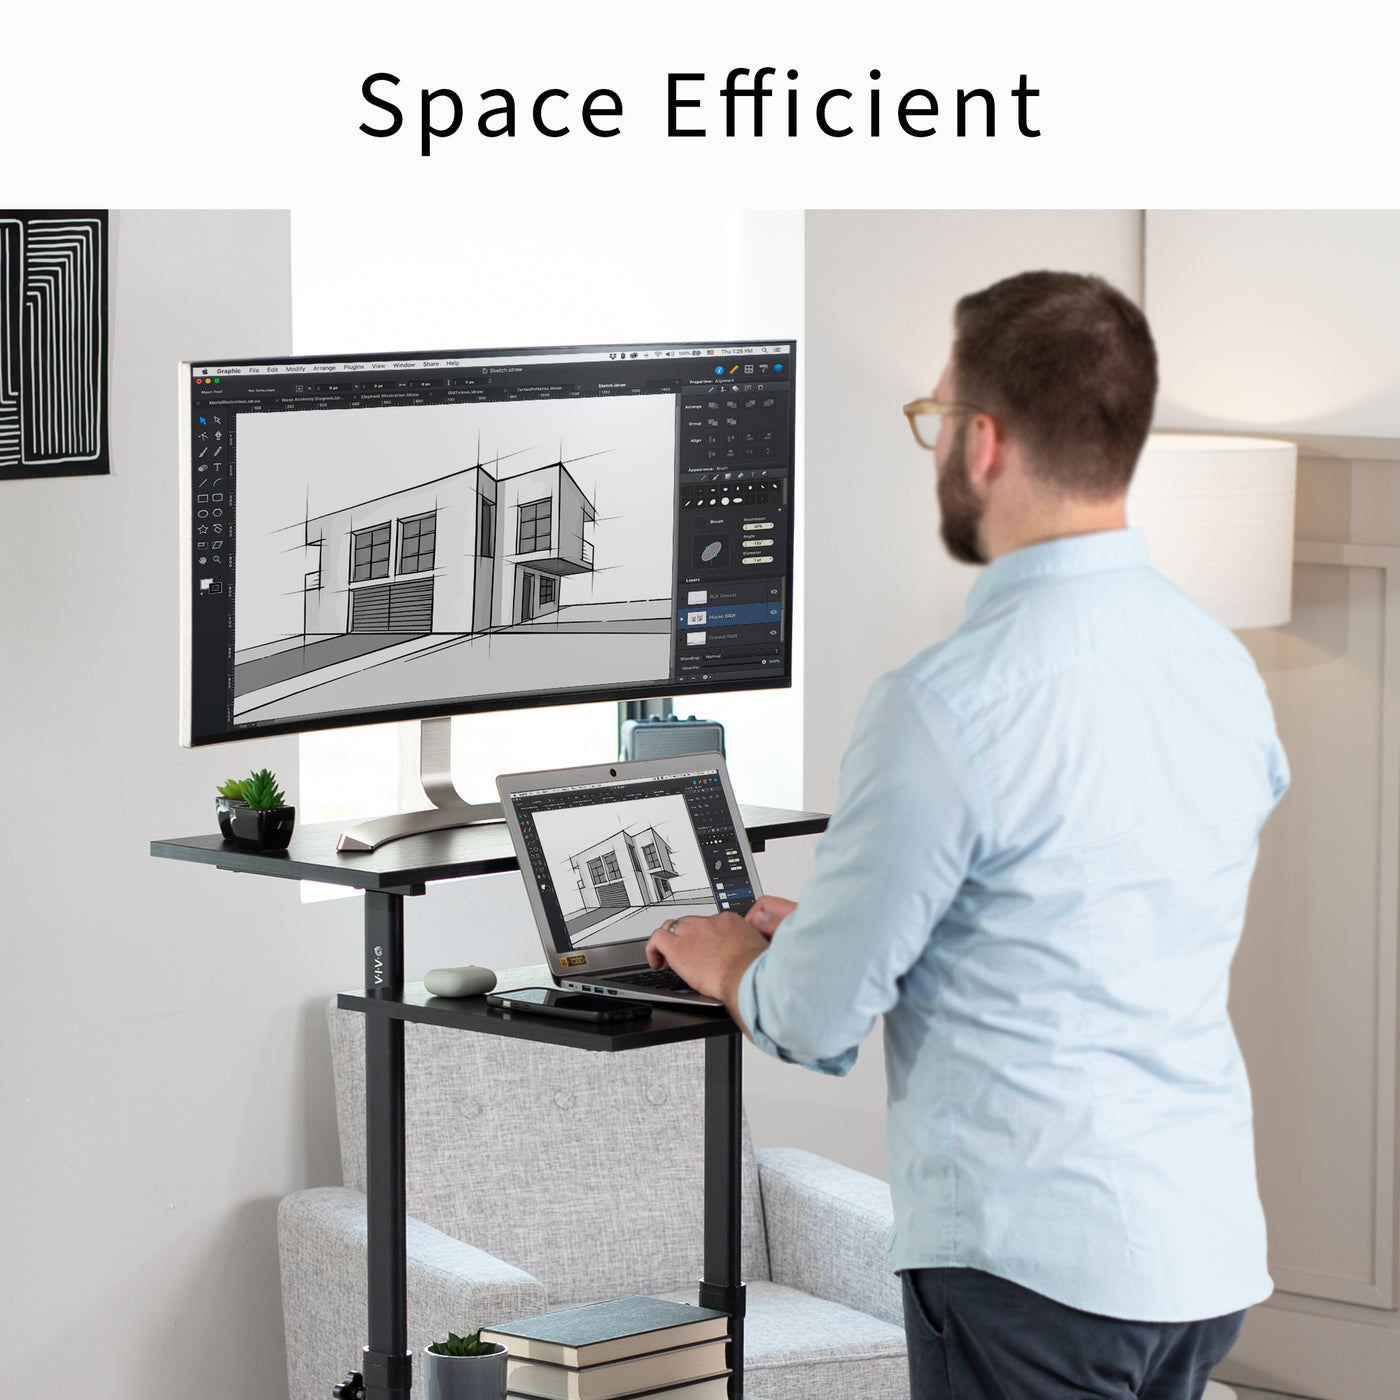 A height adjustable mobile stand-up desk that is perfect for use at the office, home, showroom, and classroom, and provides ample room for typing, writing, and storing. 